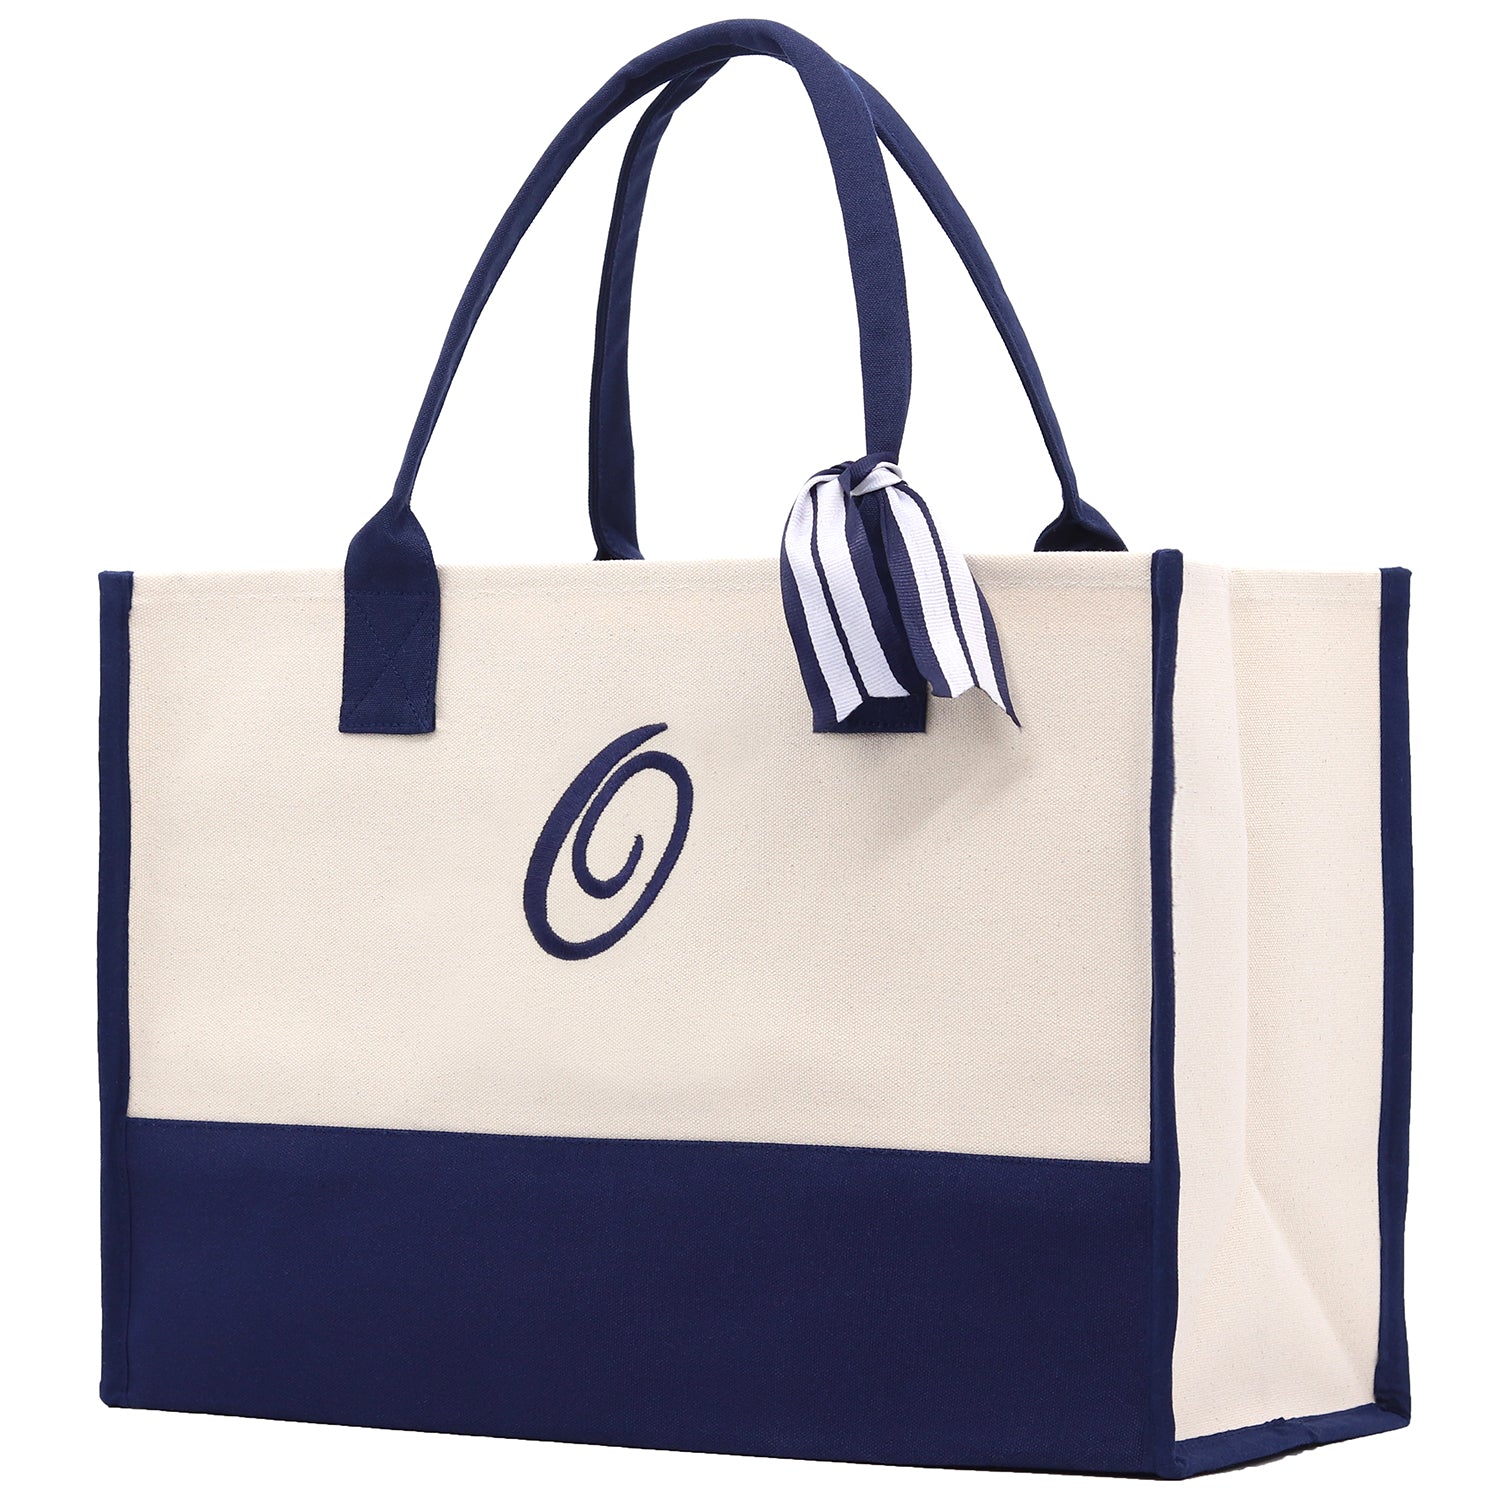 Monogram Tote Bag with 100% Cotton Canvas and a Chic Personalized Monogram Navy Blue Vanessa Rosella Script O 